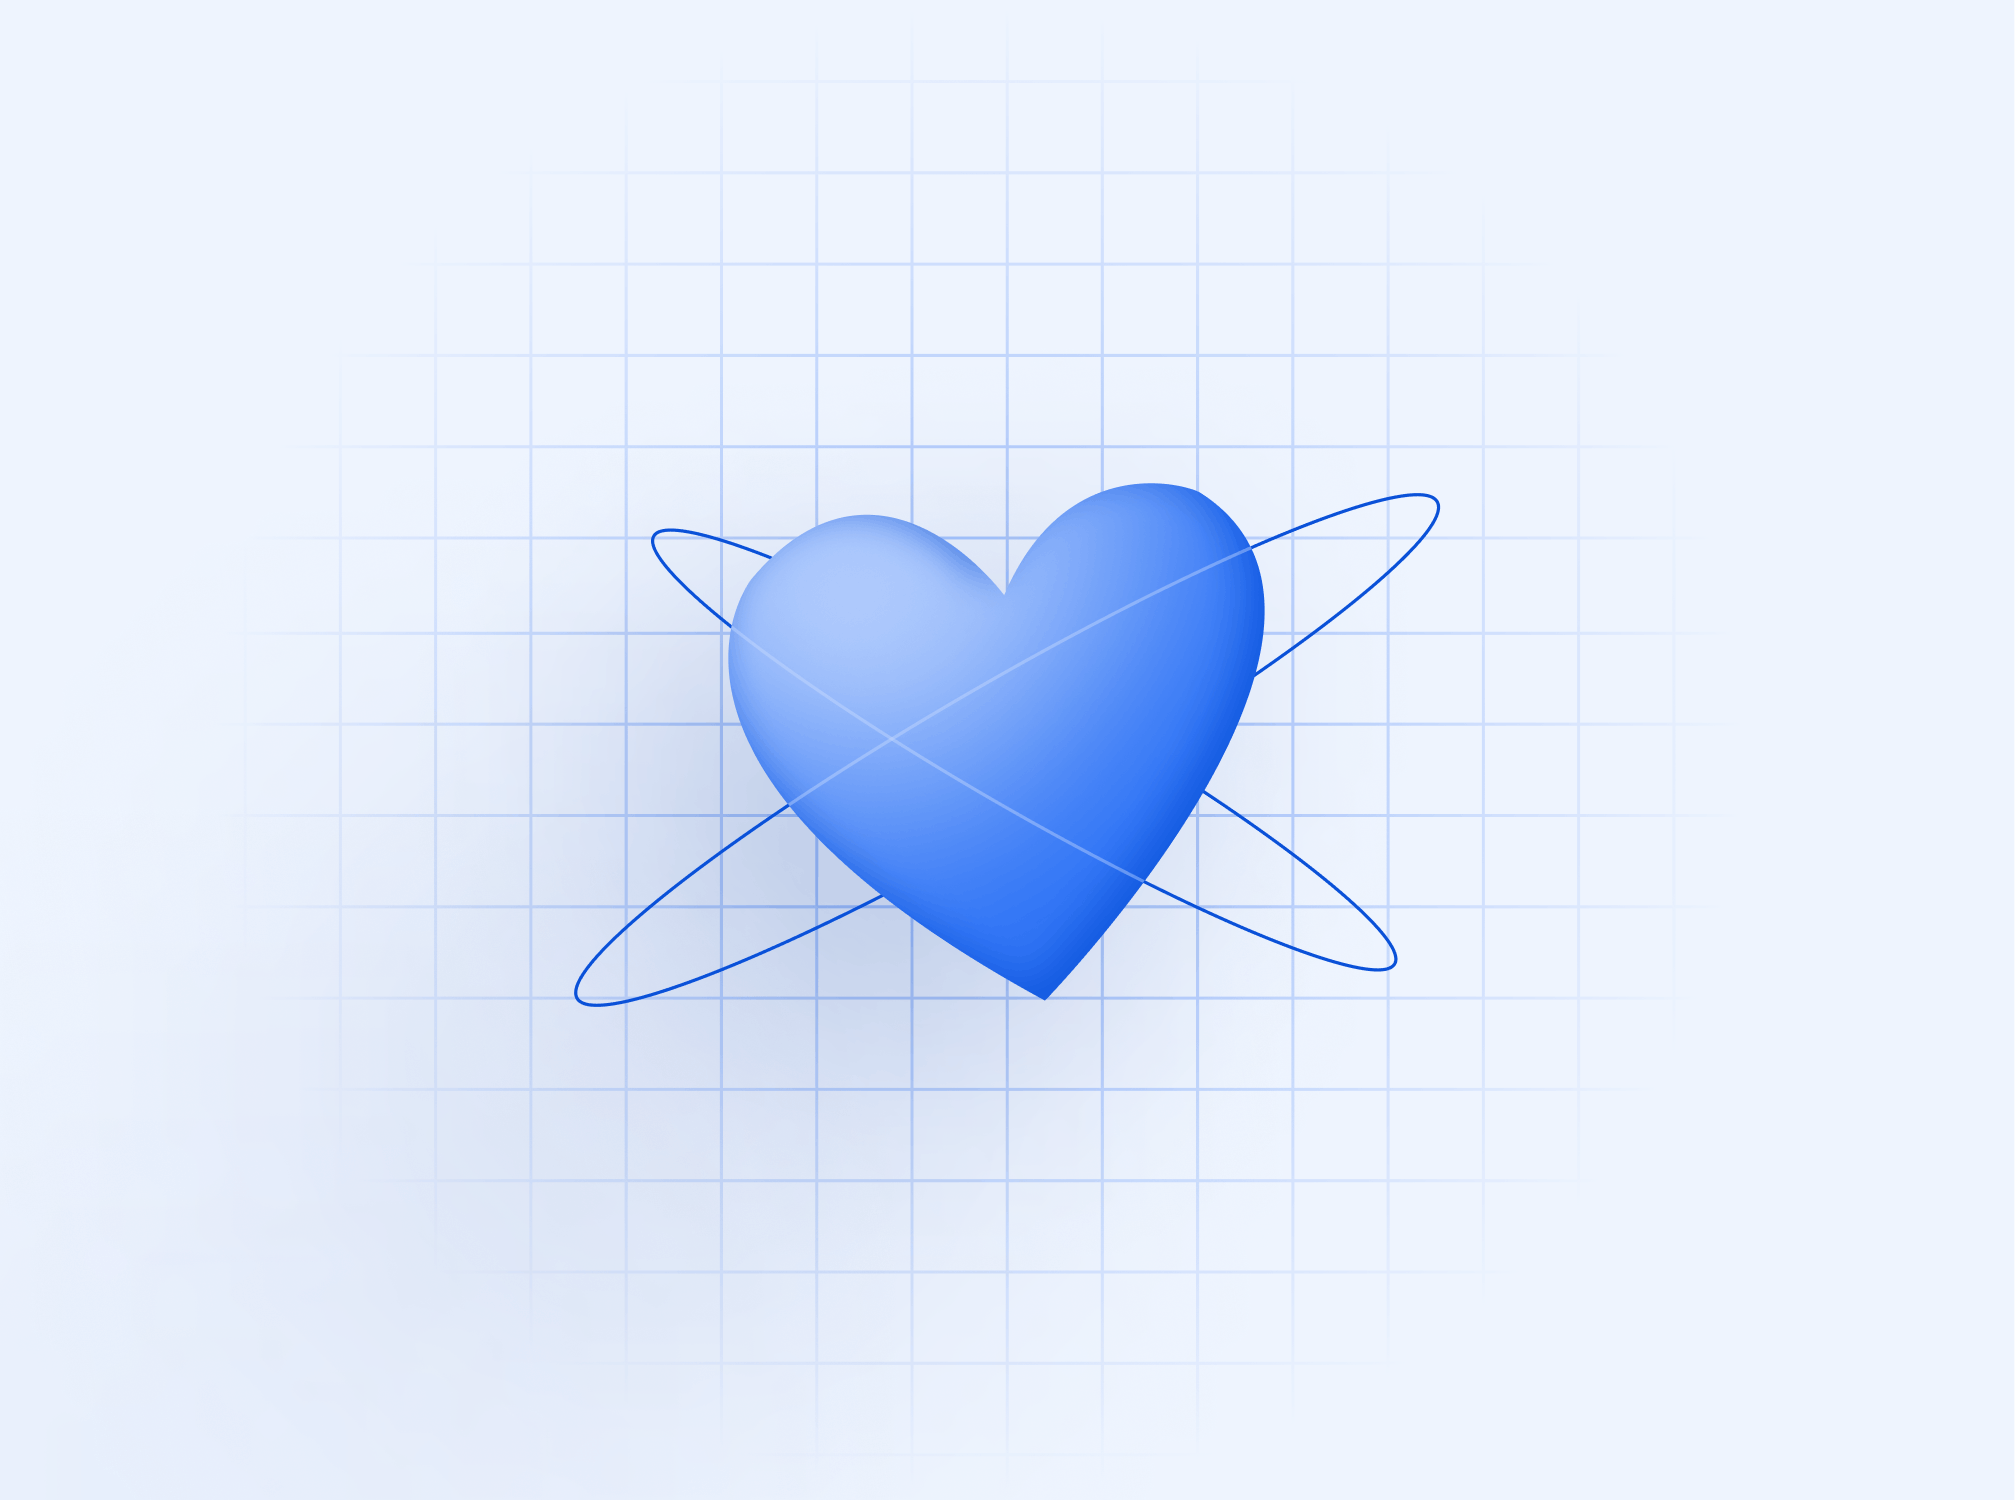 A large blue heart icon